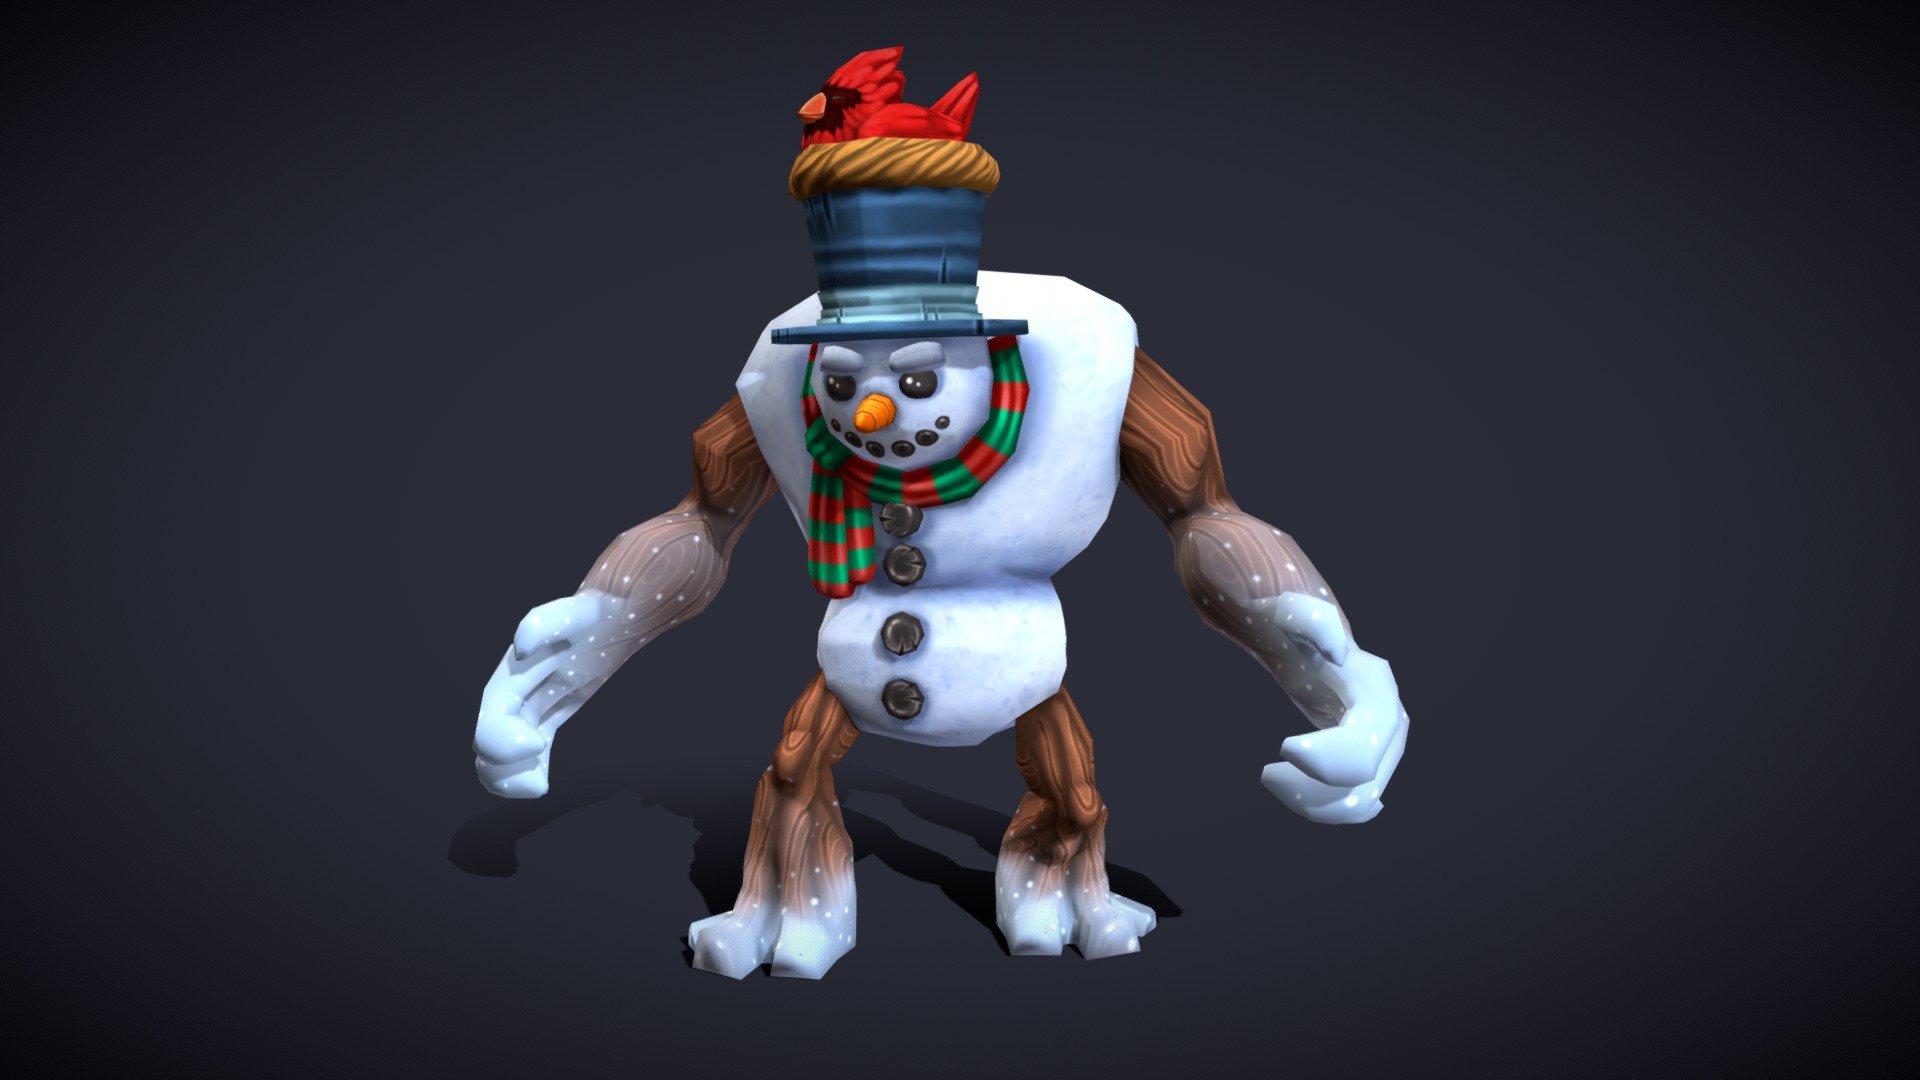 Xmas Snowman Golem made for “World of Epic Hunters” mobile game.
https://worldofepichuntersgame.com/

3D Model made by me:
https://www.artstation.com/darkano

Texture and Concept Art by Marta Pańczak:
https://www.artstation.com/martapanczak - Xmas Snowman Golem [World of Epic Hunters] - 3D model by Adrian Wenek (@Adrian.Wenek) 3d model